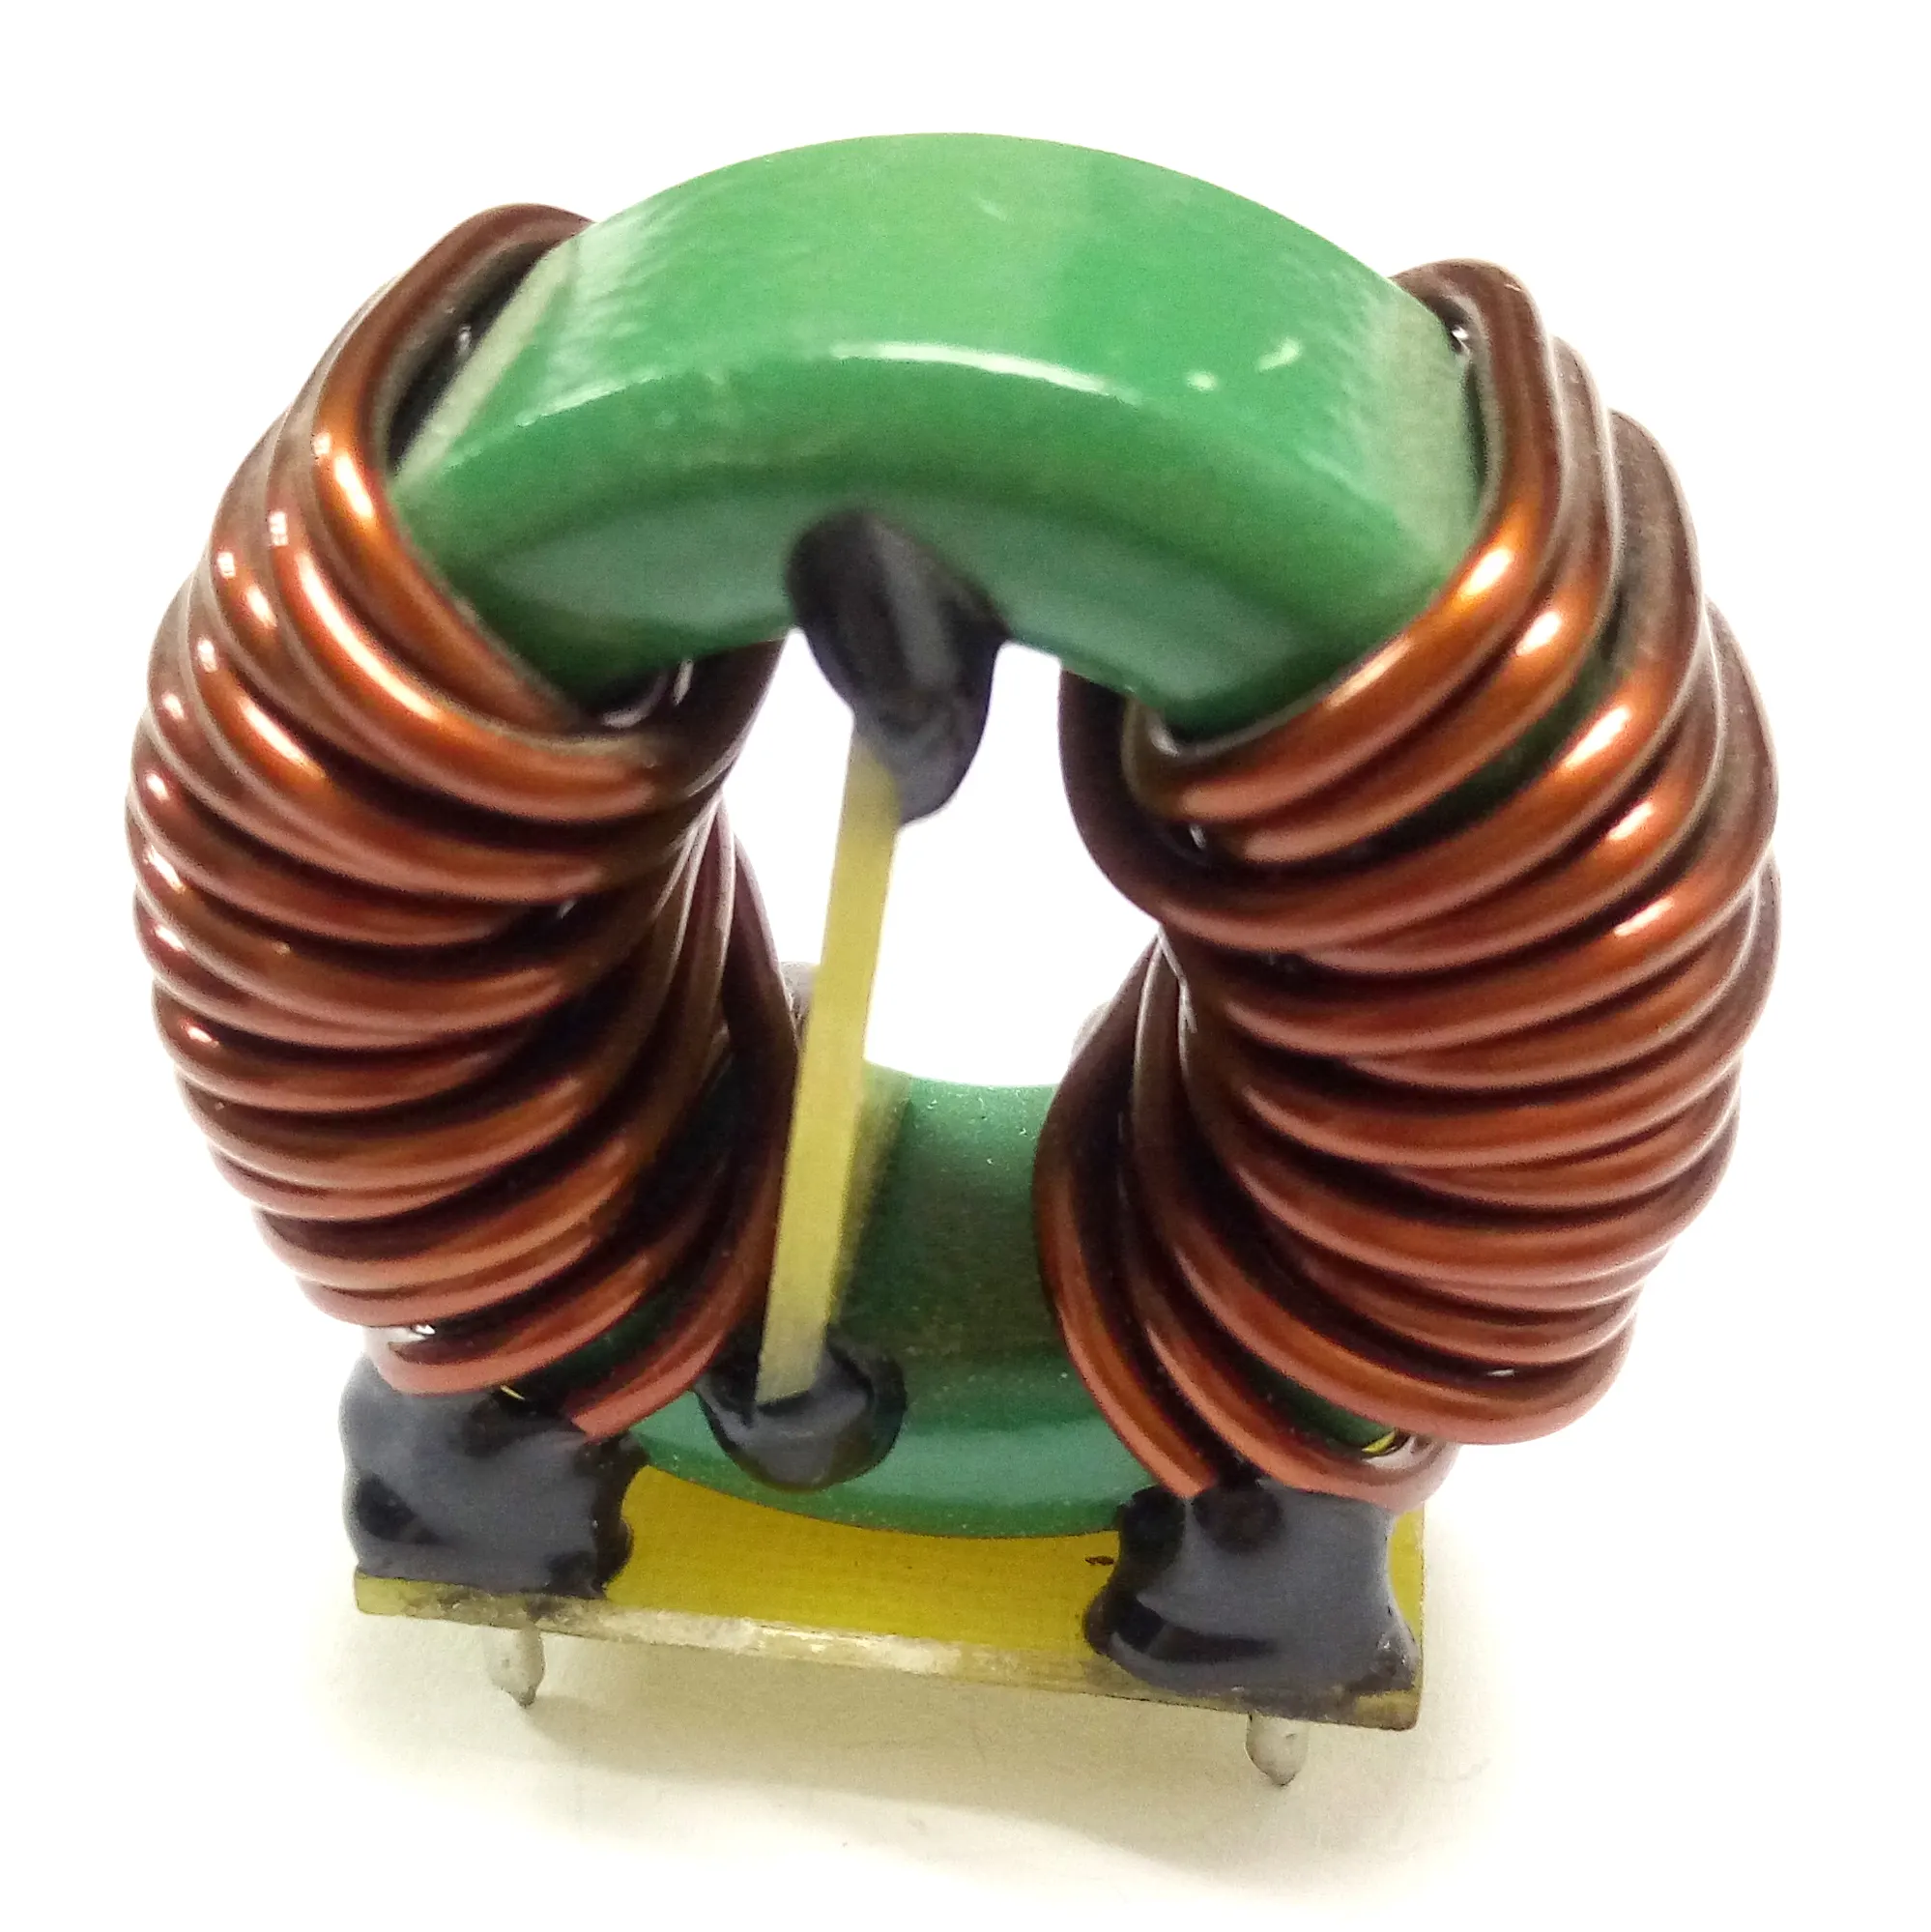 custom and free samples power inductor 100uh high current common choke induction coils common mode chock inductor